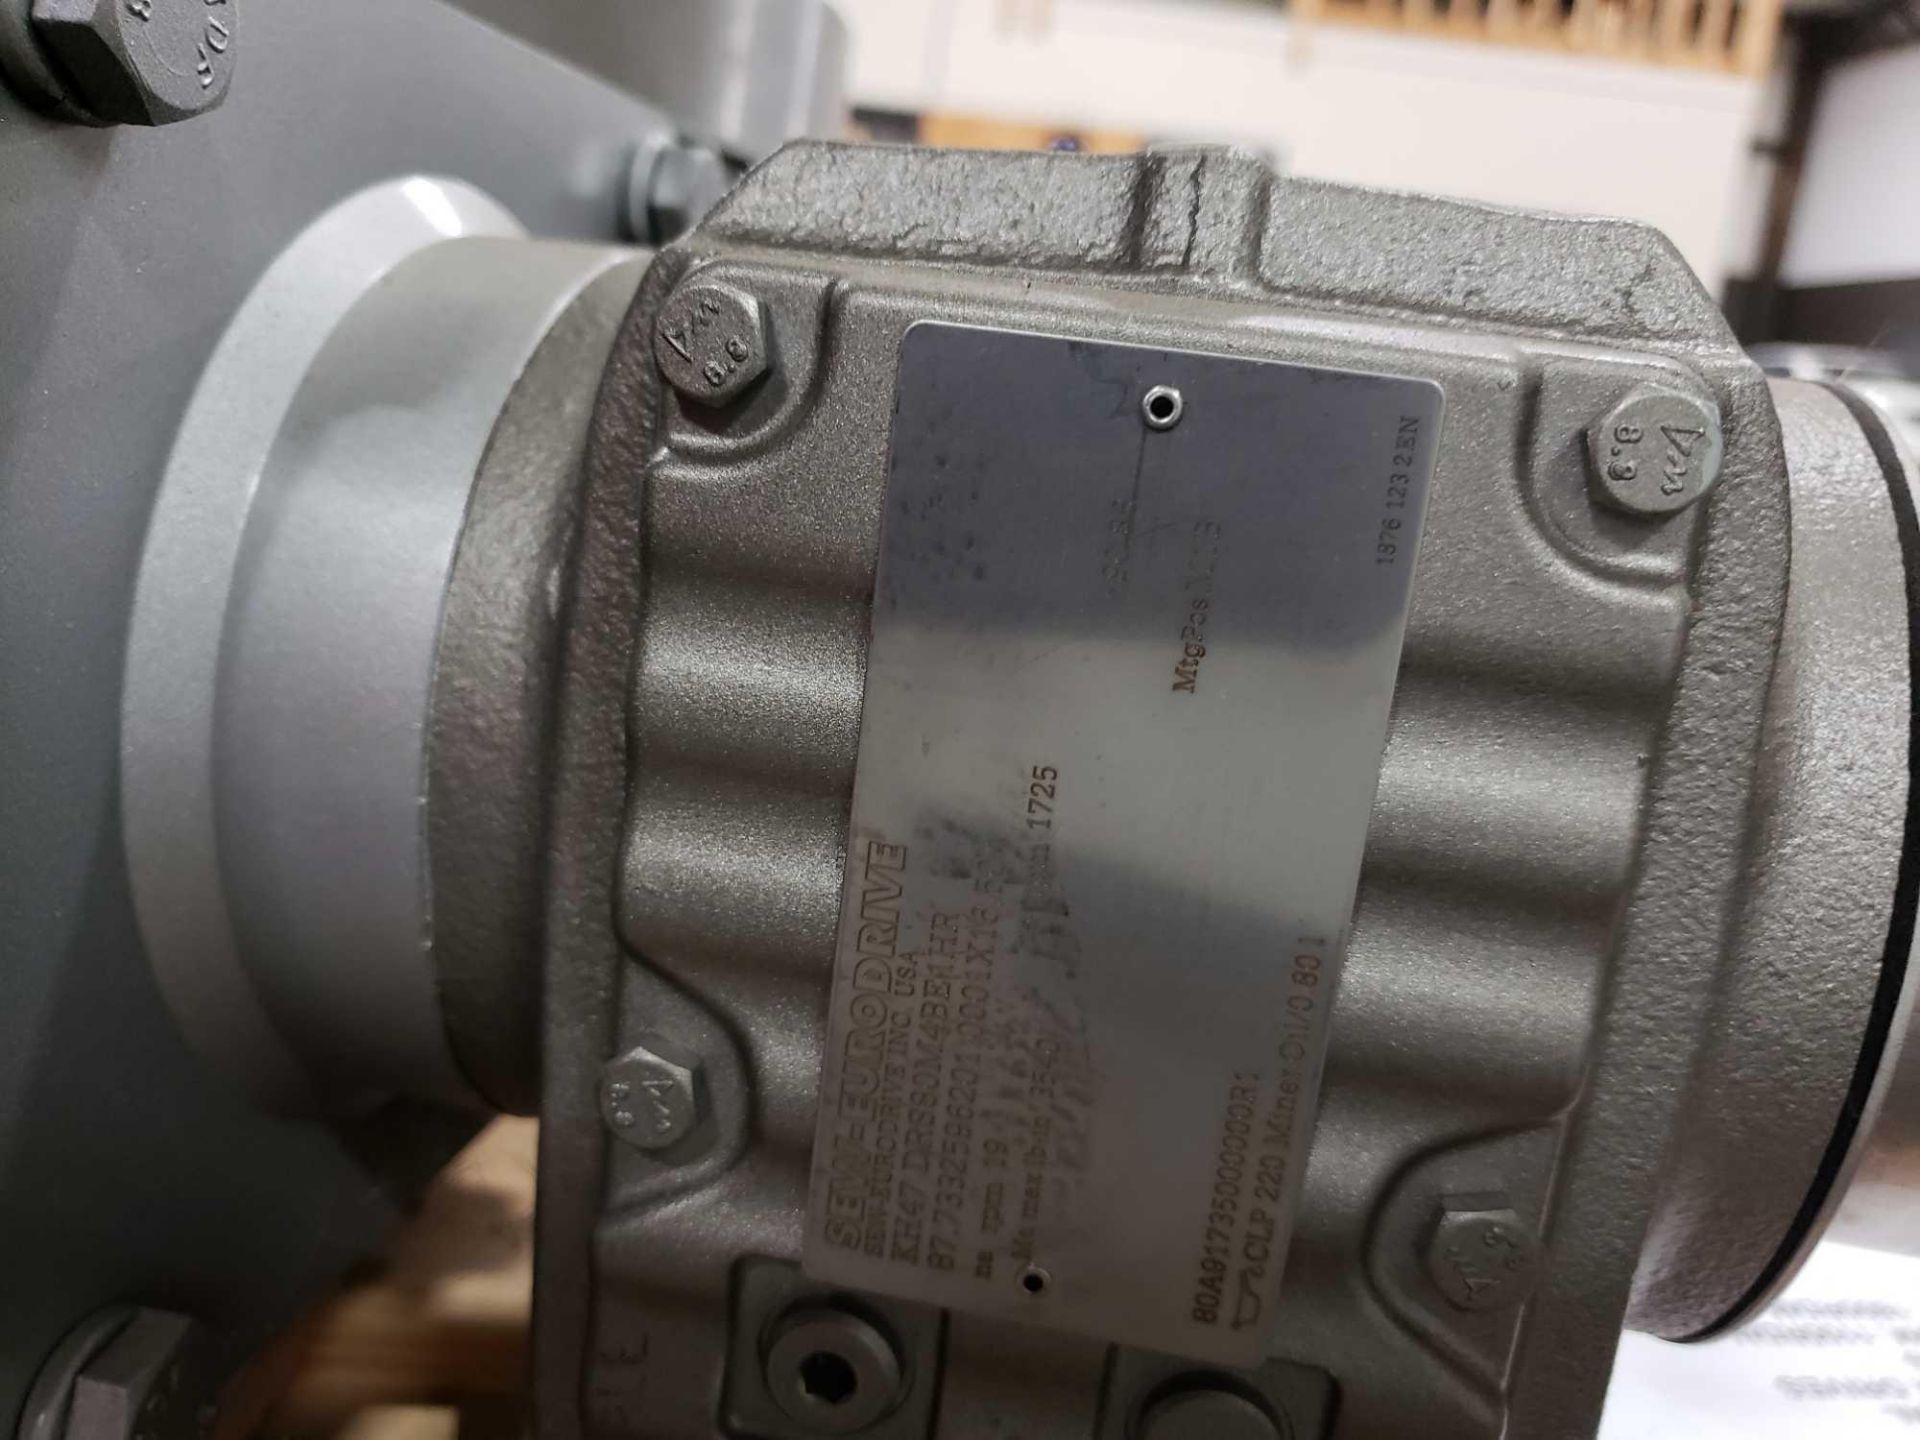 Camco model 1100RDM2H48-330 rotary positioner. New on pallet with paperwork. - Image 4 of 5